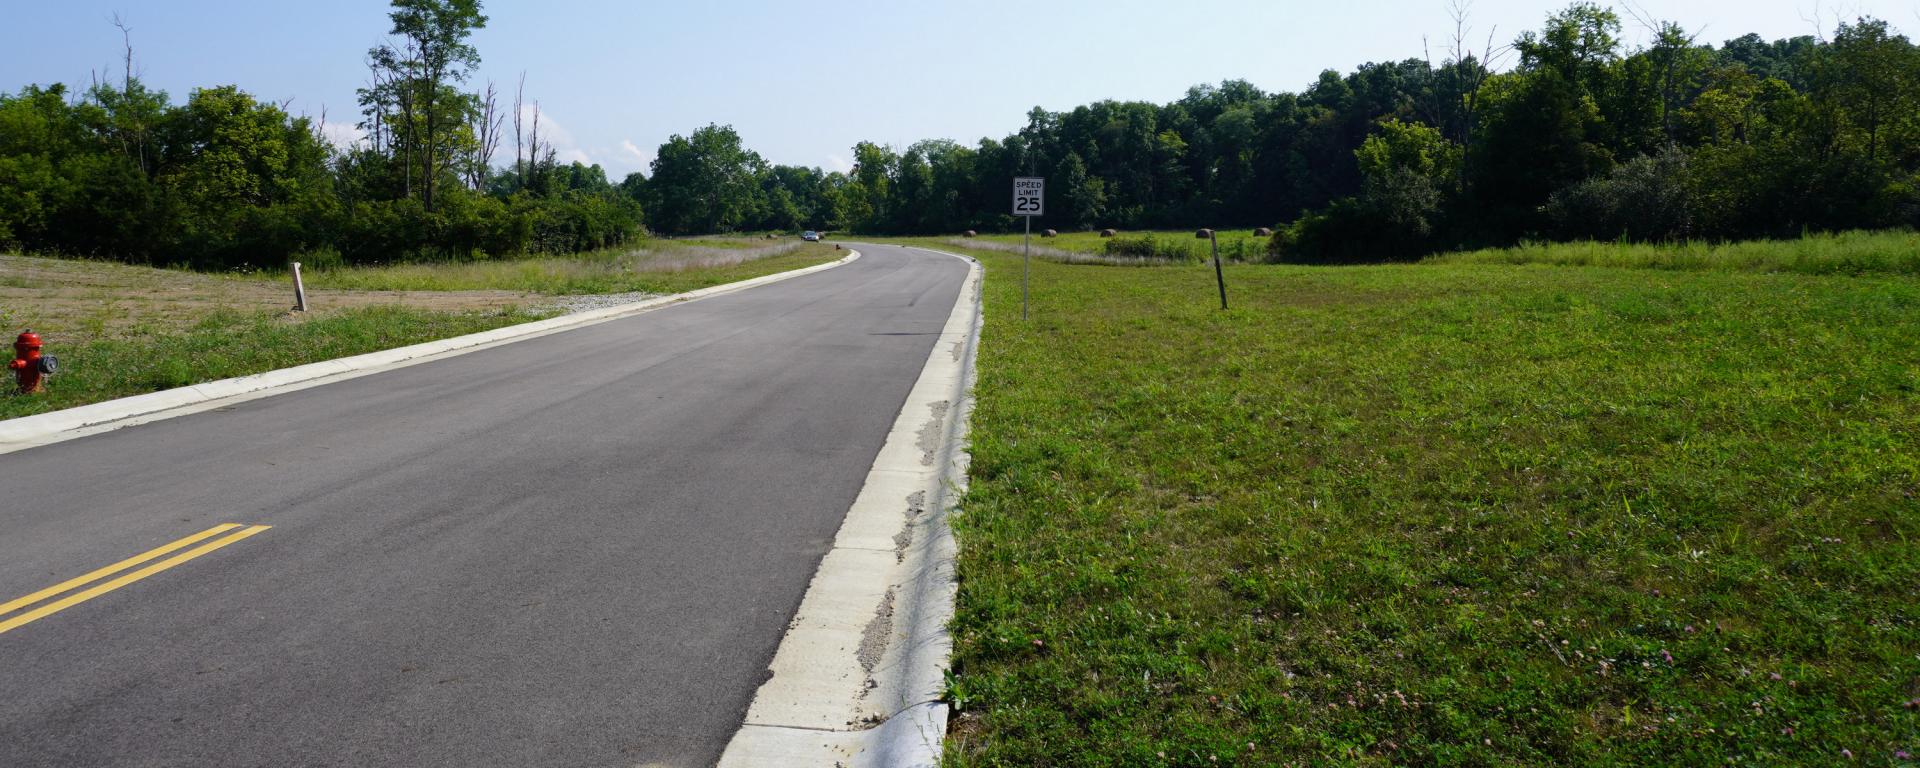 newly paved roadway surrounded by grass